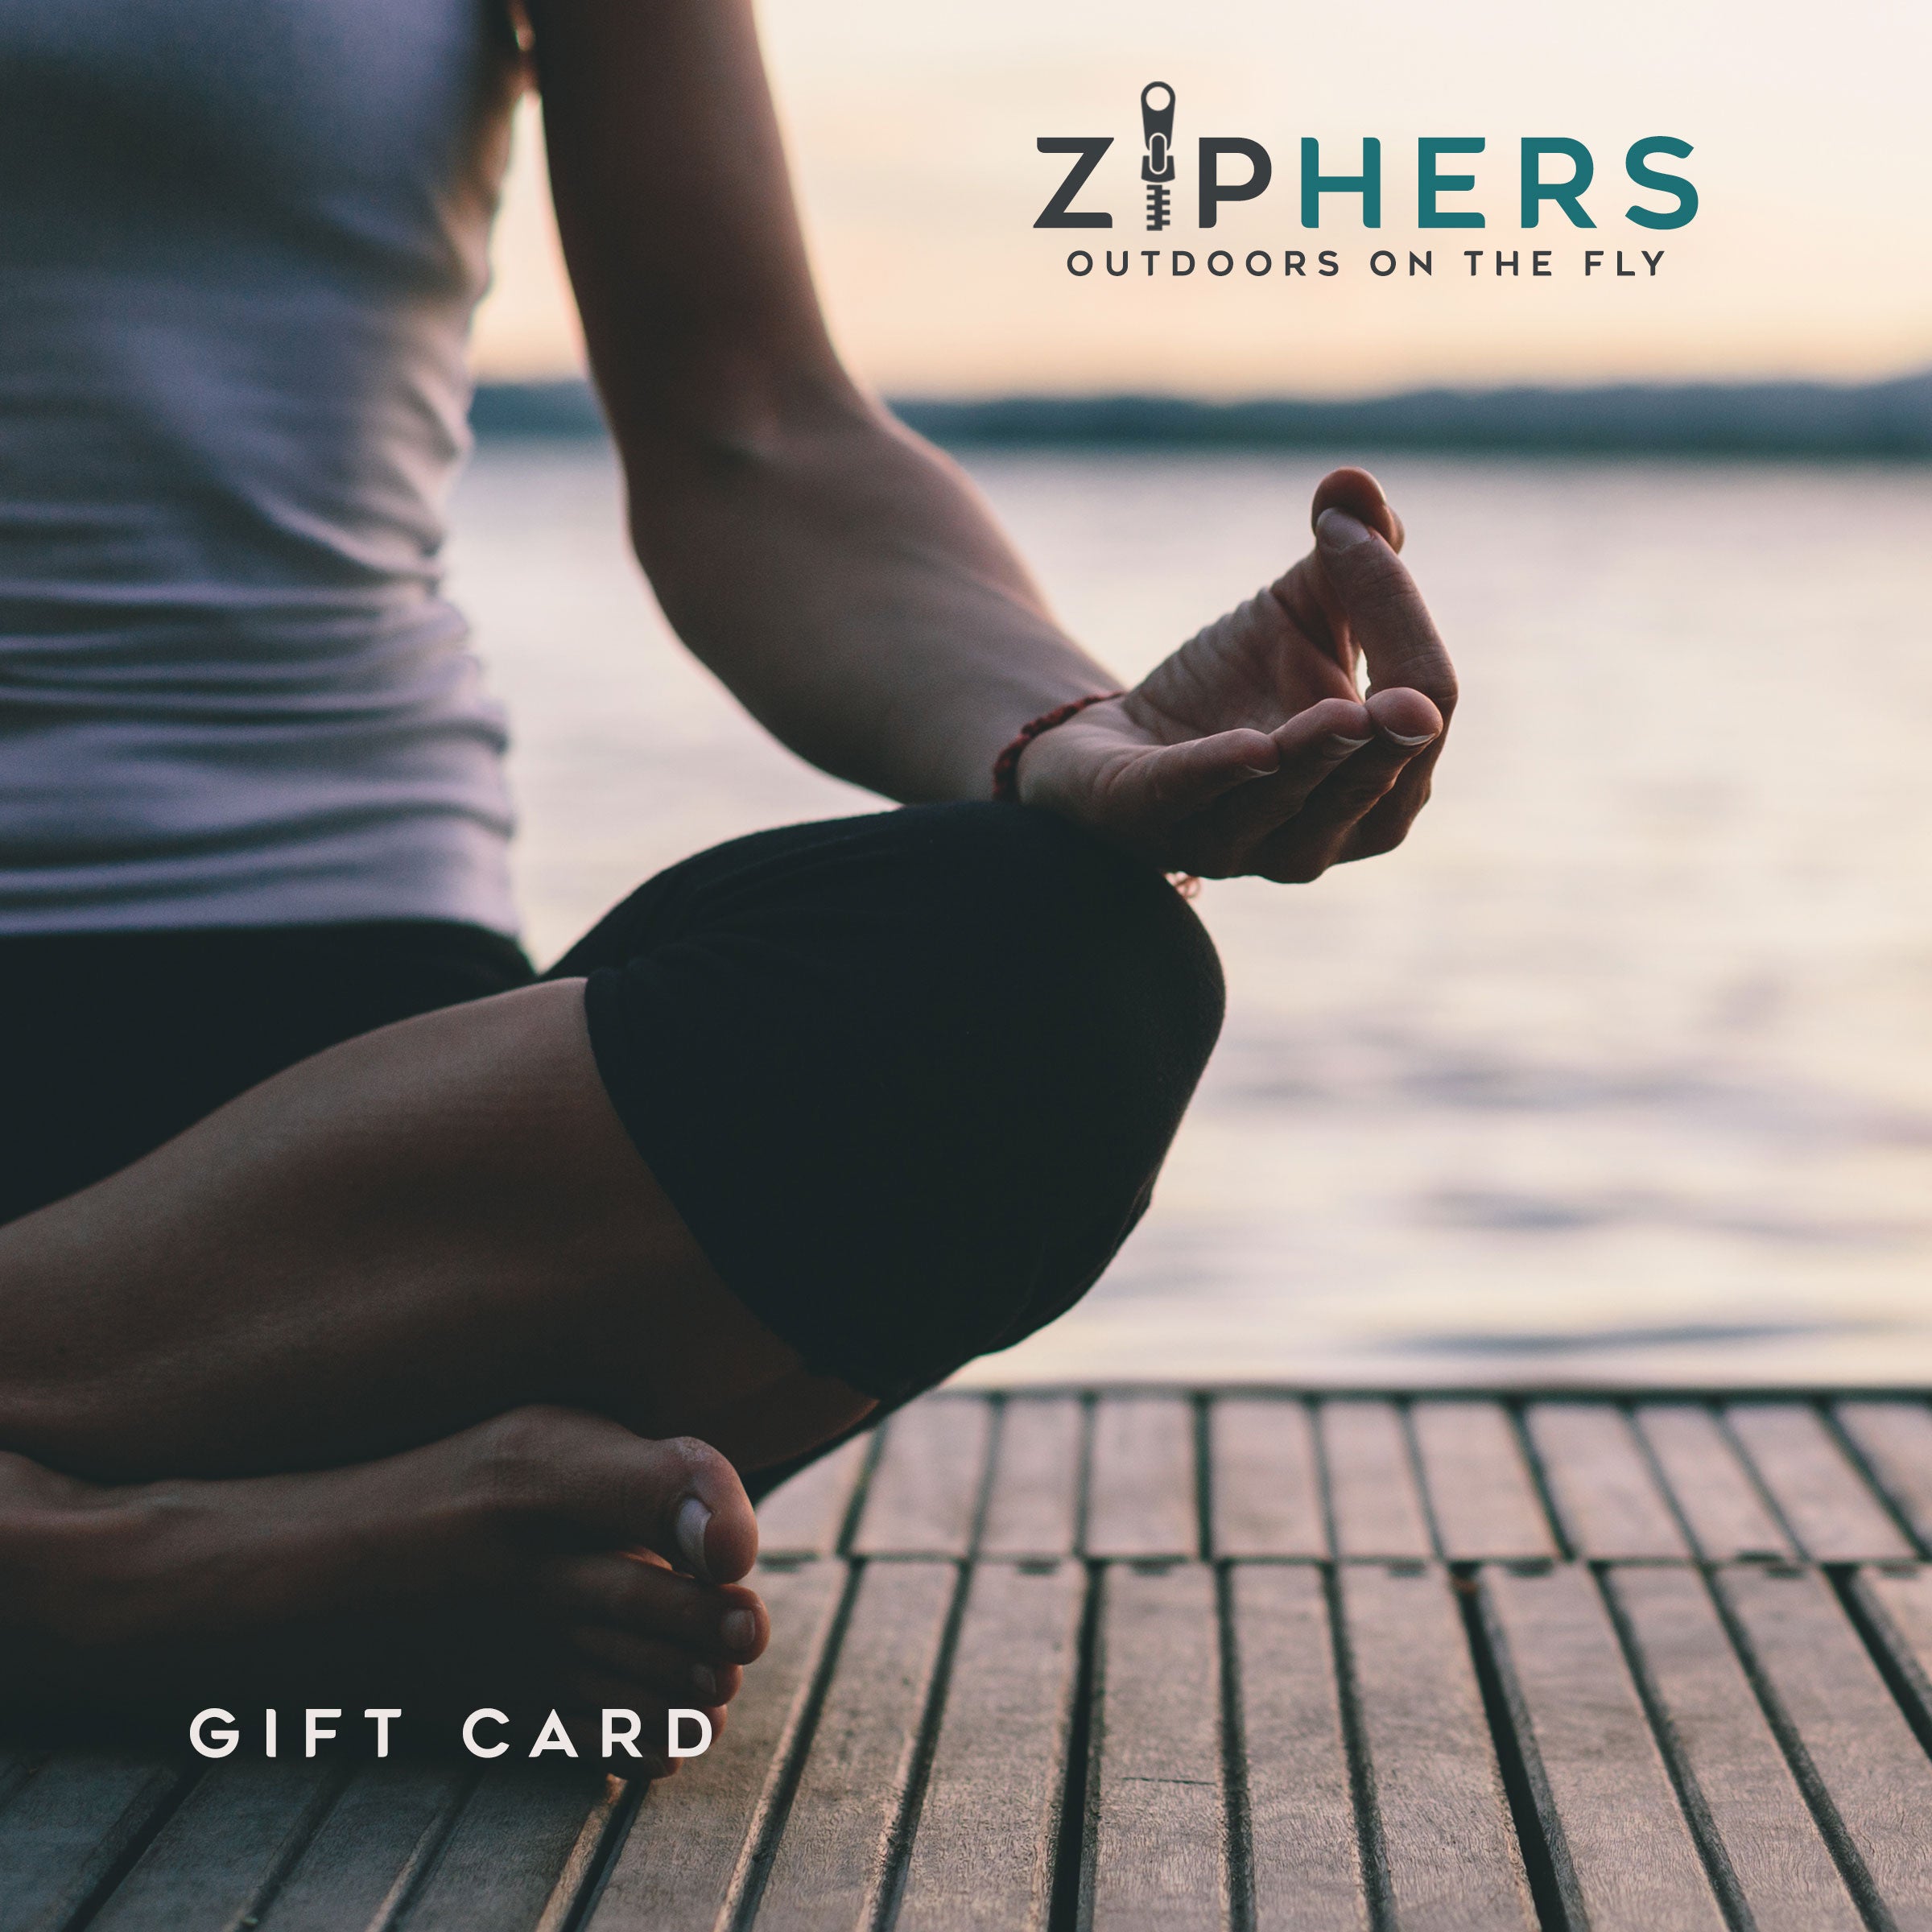 Zip Hers Gift Card made easy for you